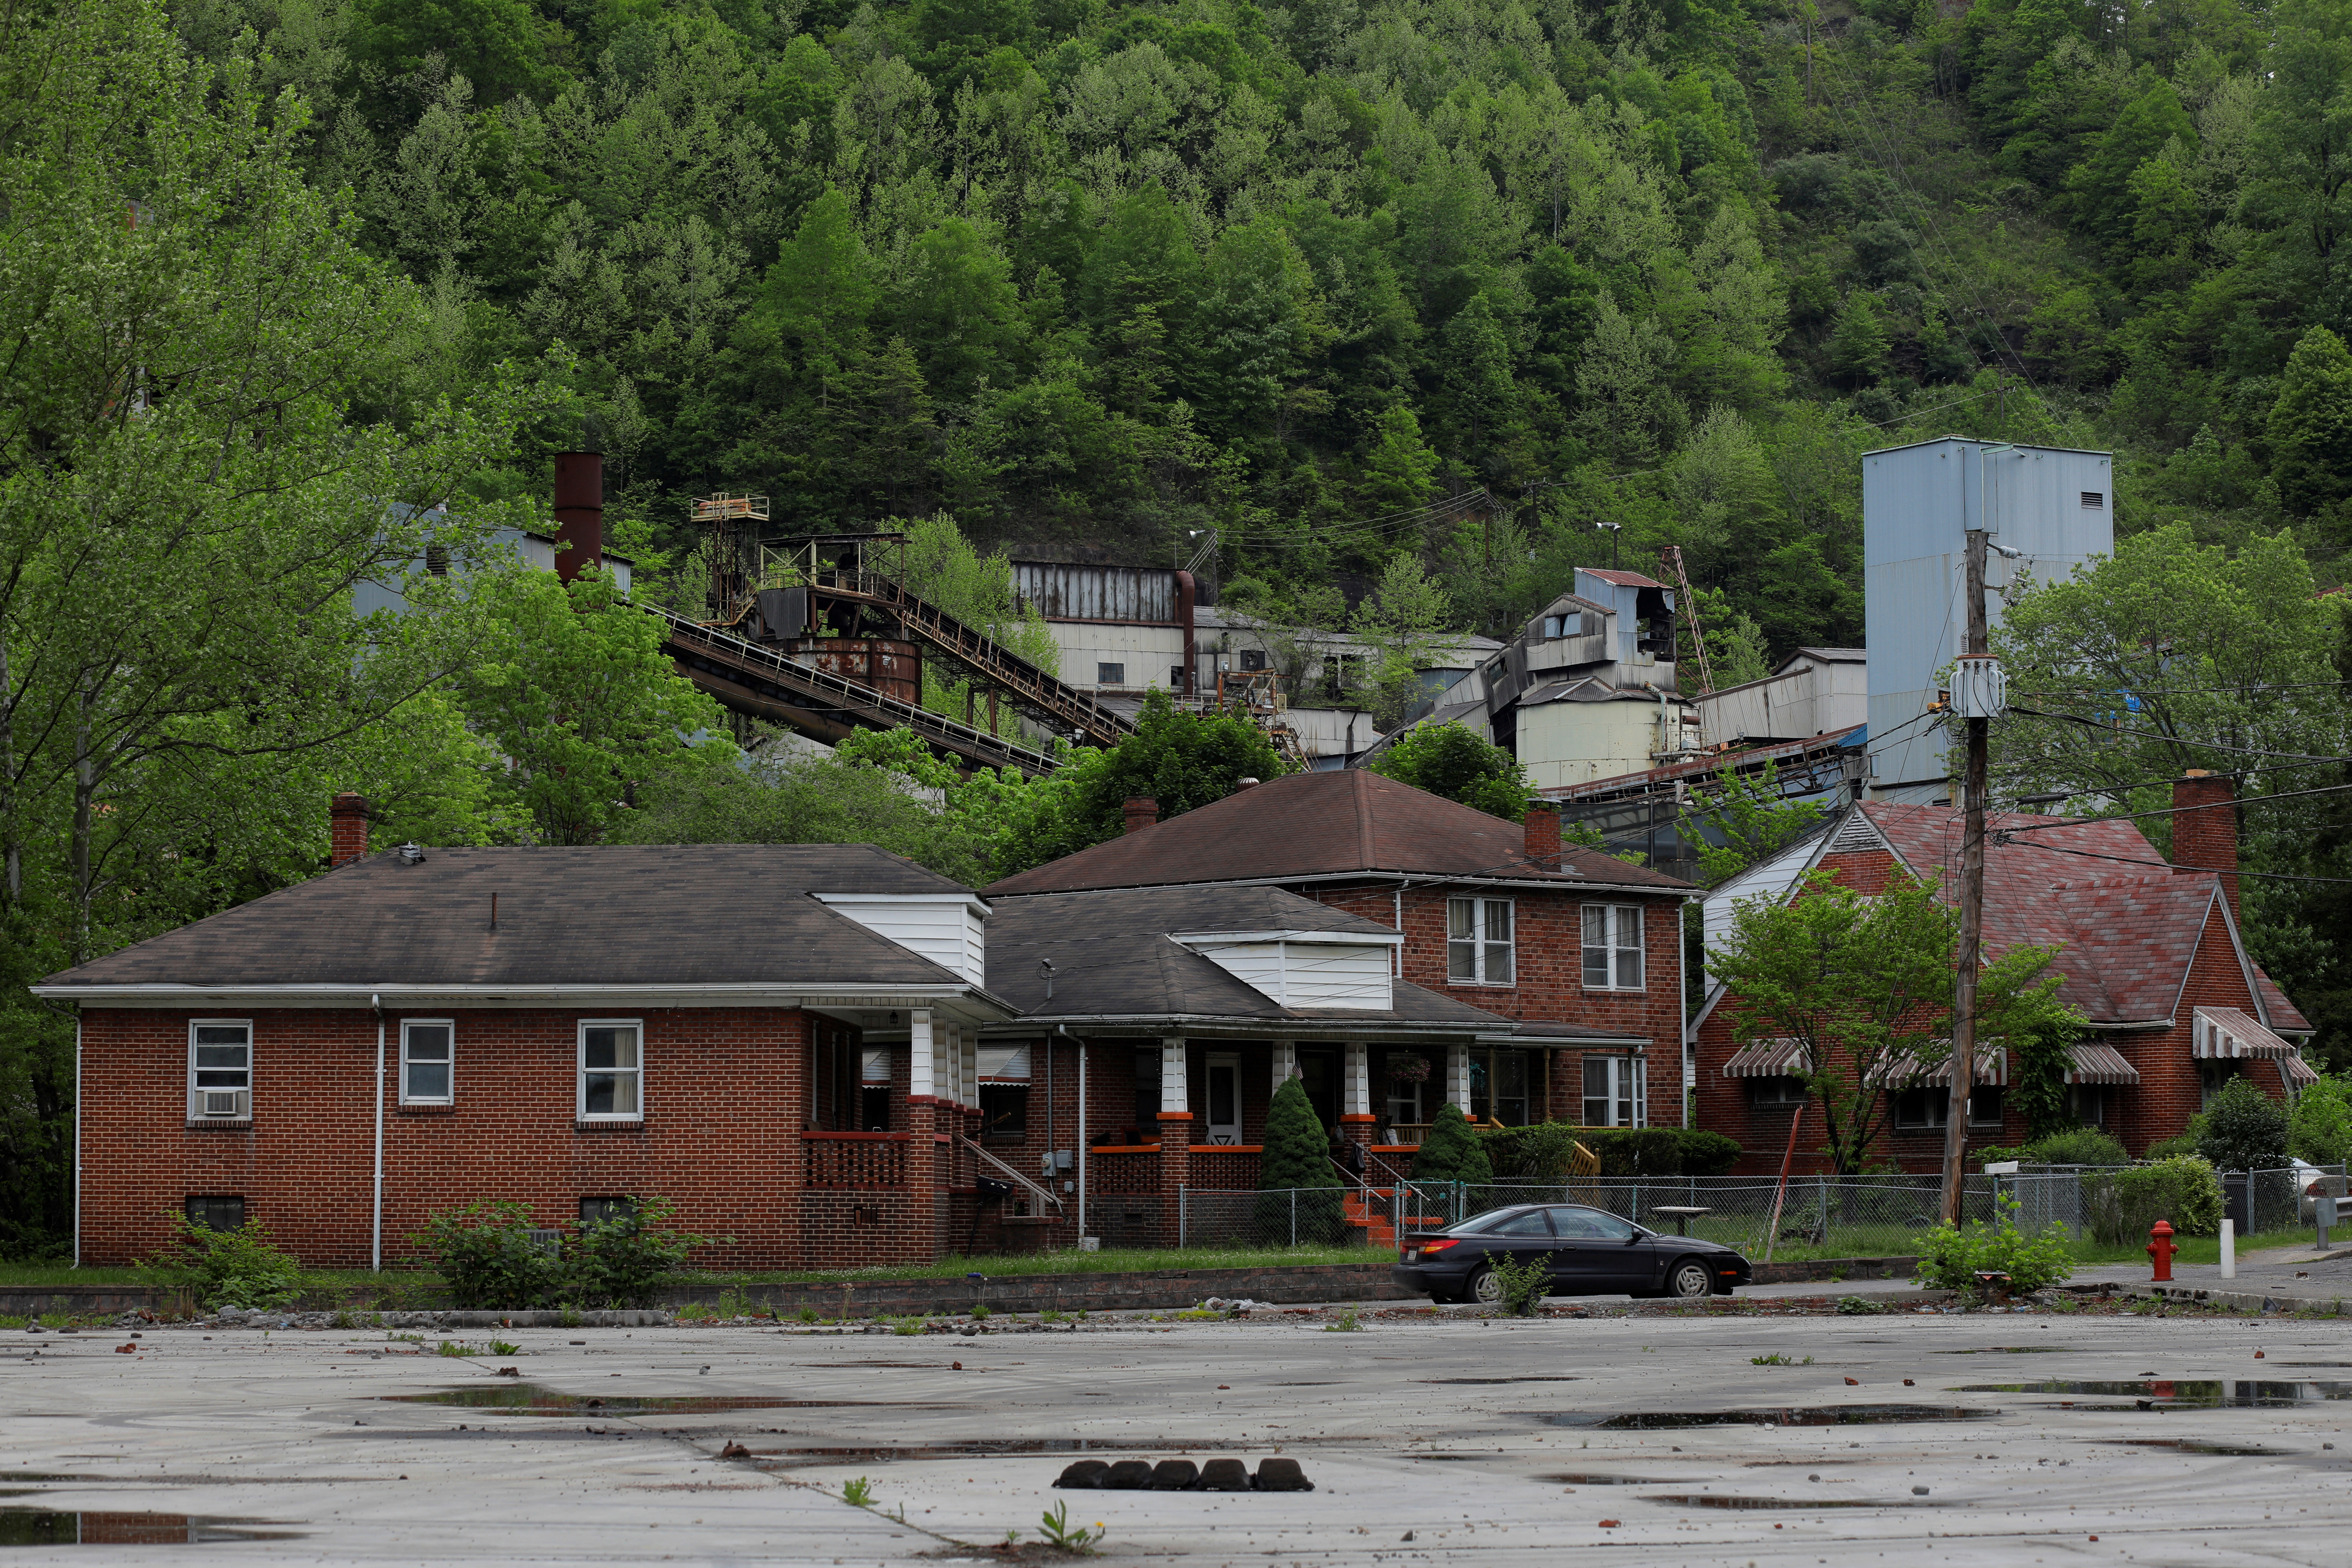 Homes sit in front of an idled coal mine in Keystone, West Virginia